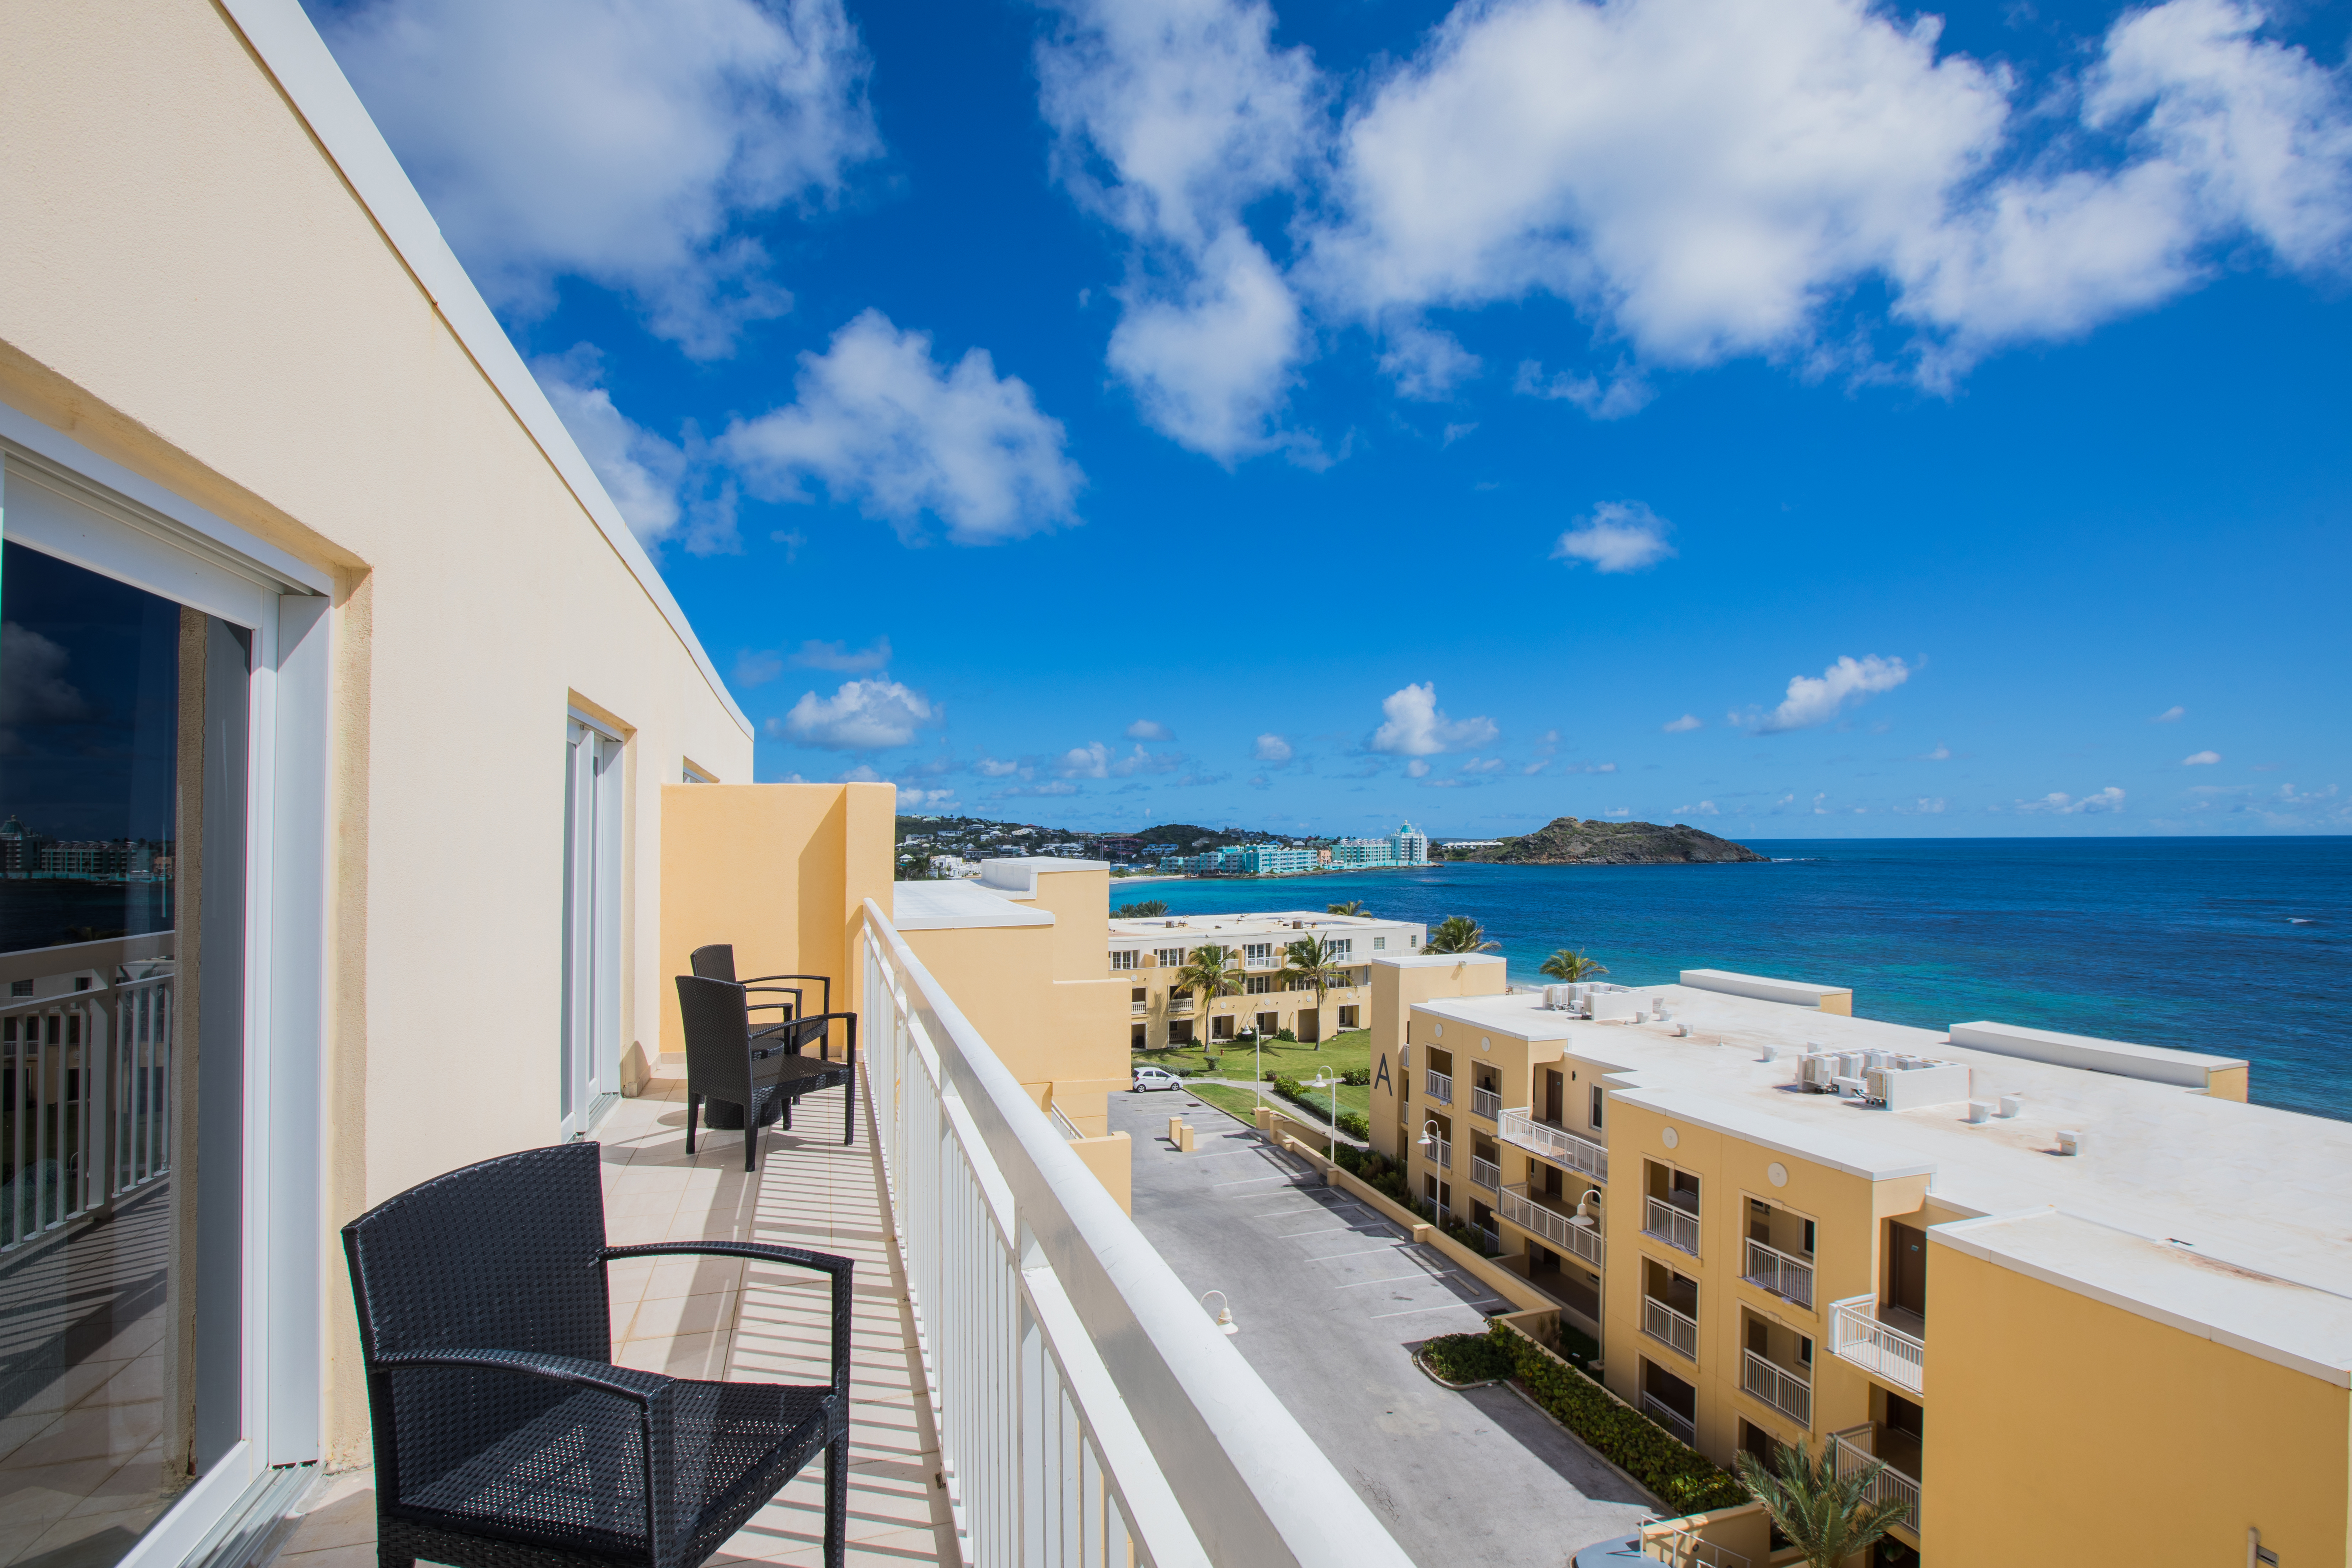 Property Image 1 - Beautiful 3 bedroom condo unit with access to infinity pool and fitness room